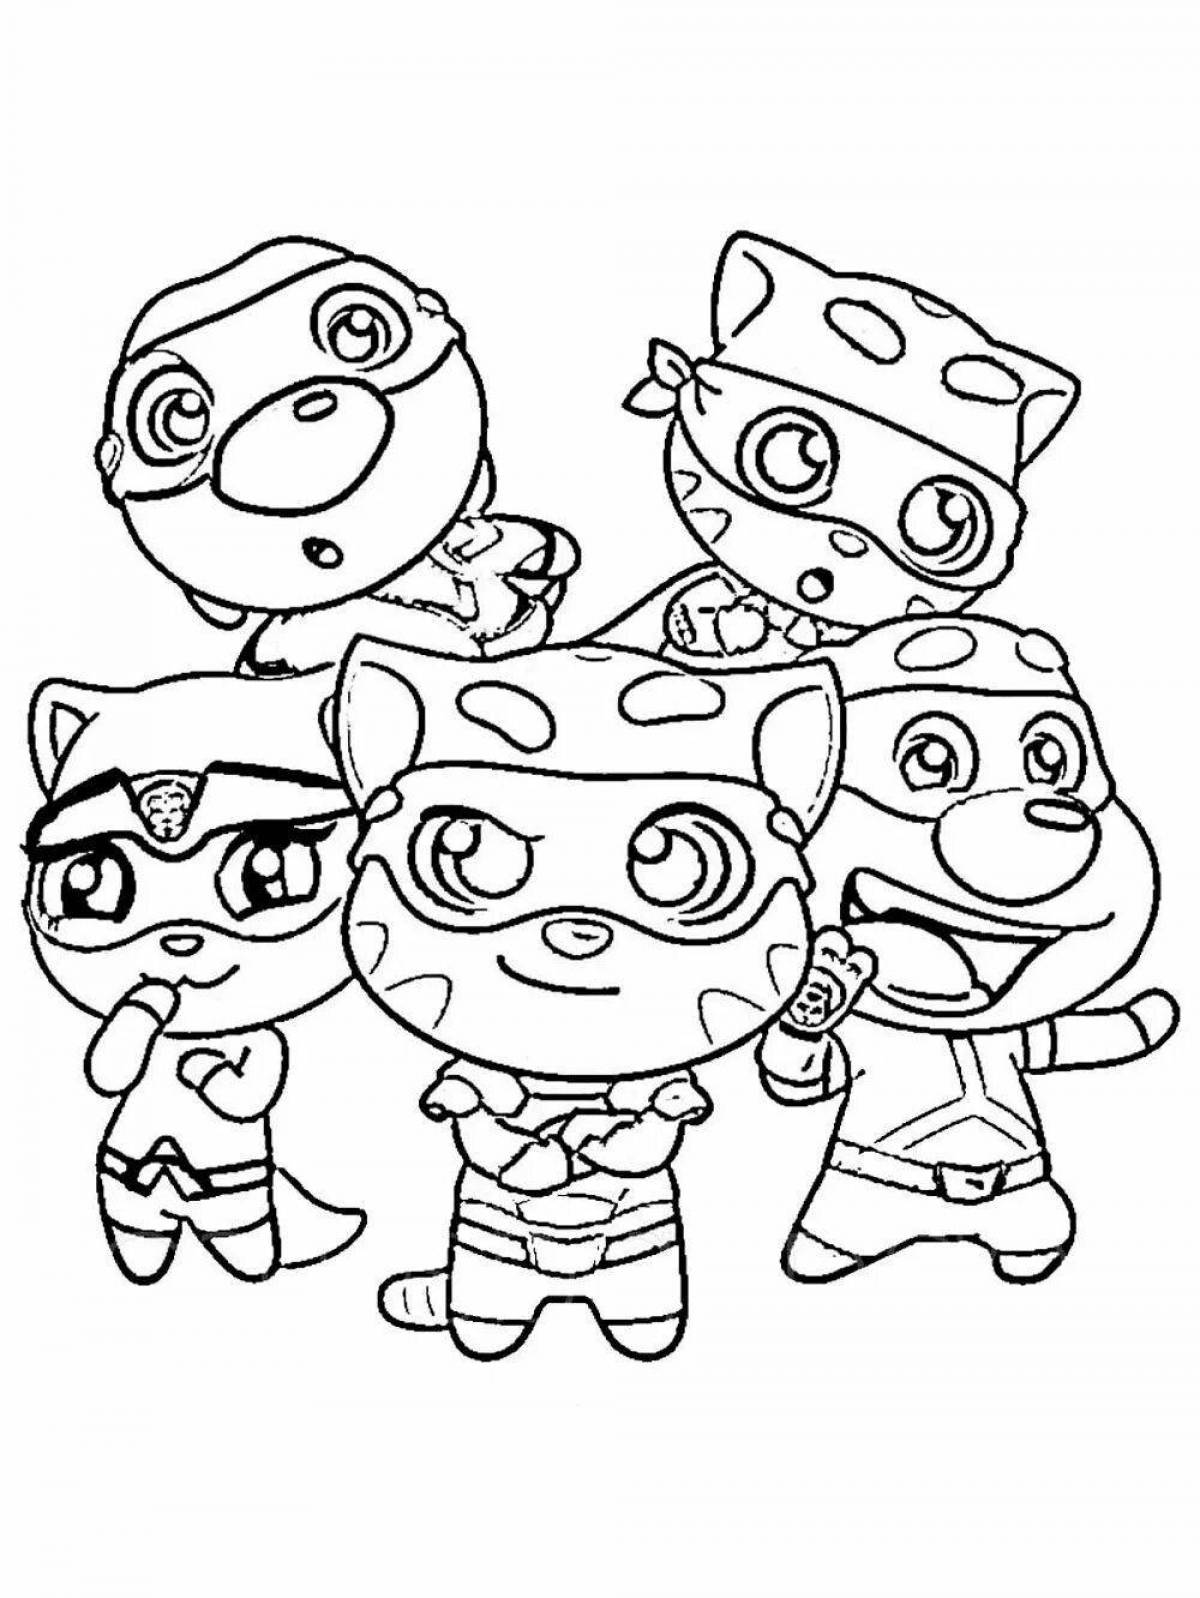 Jolly angela coloring pages for kids